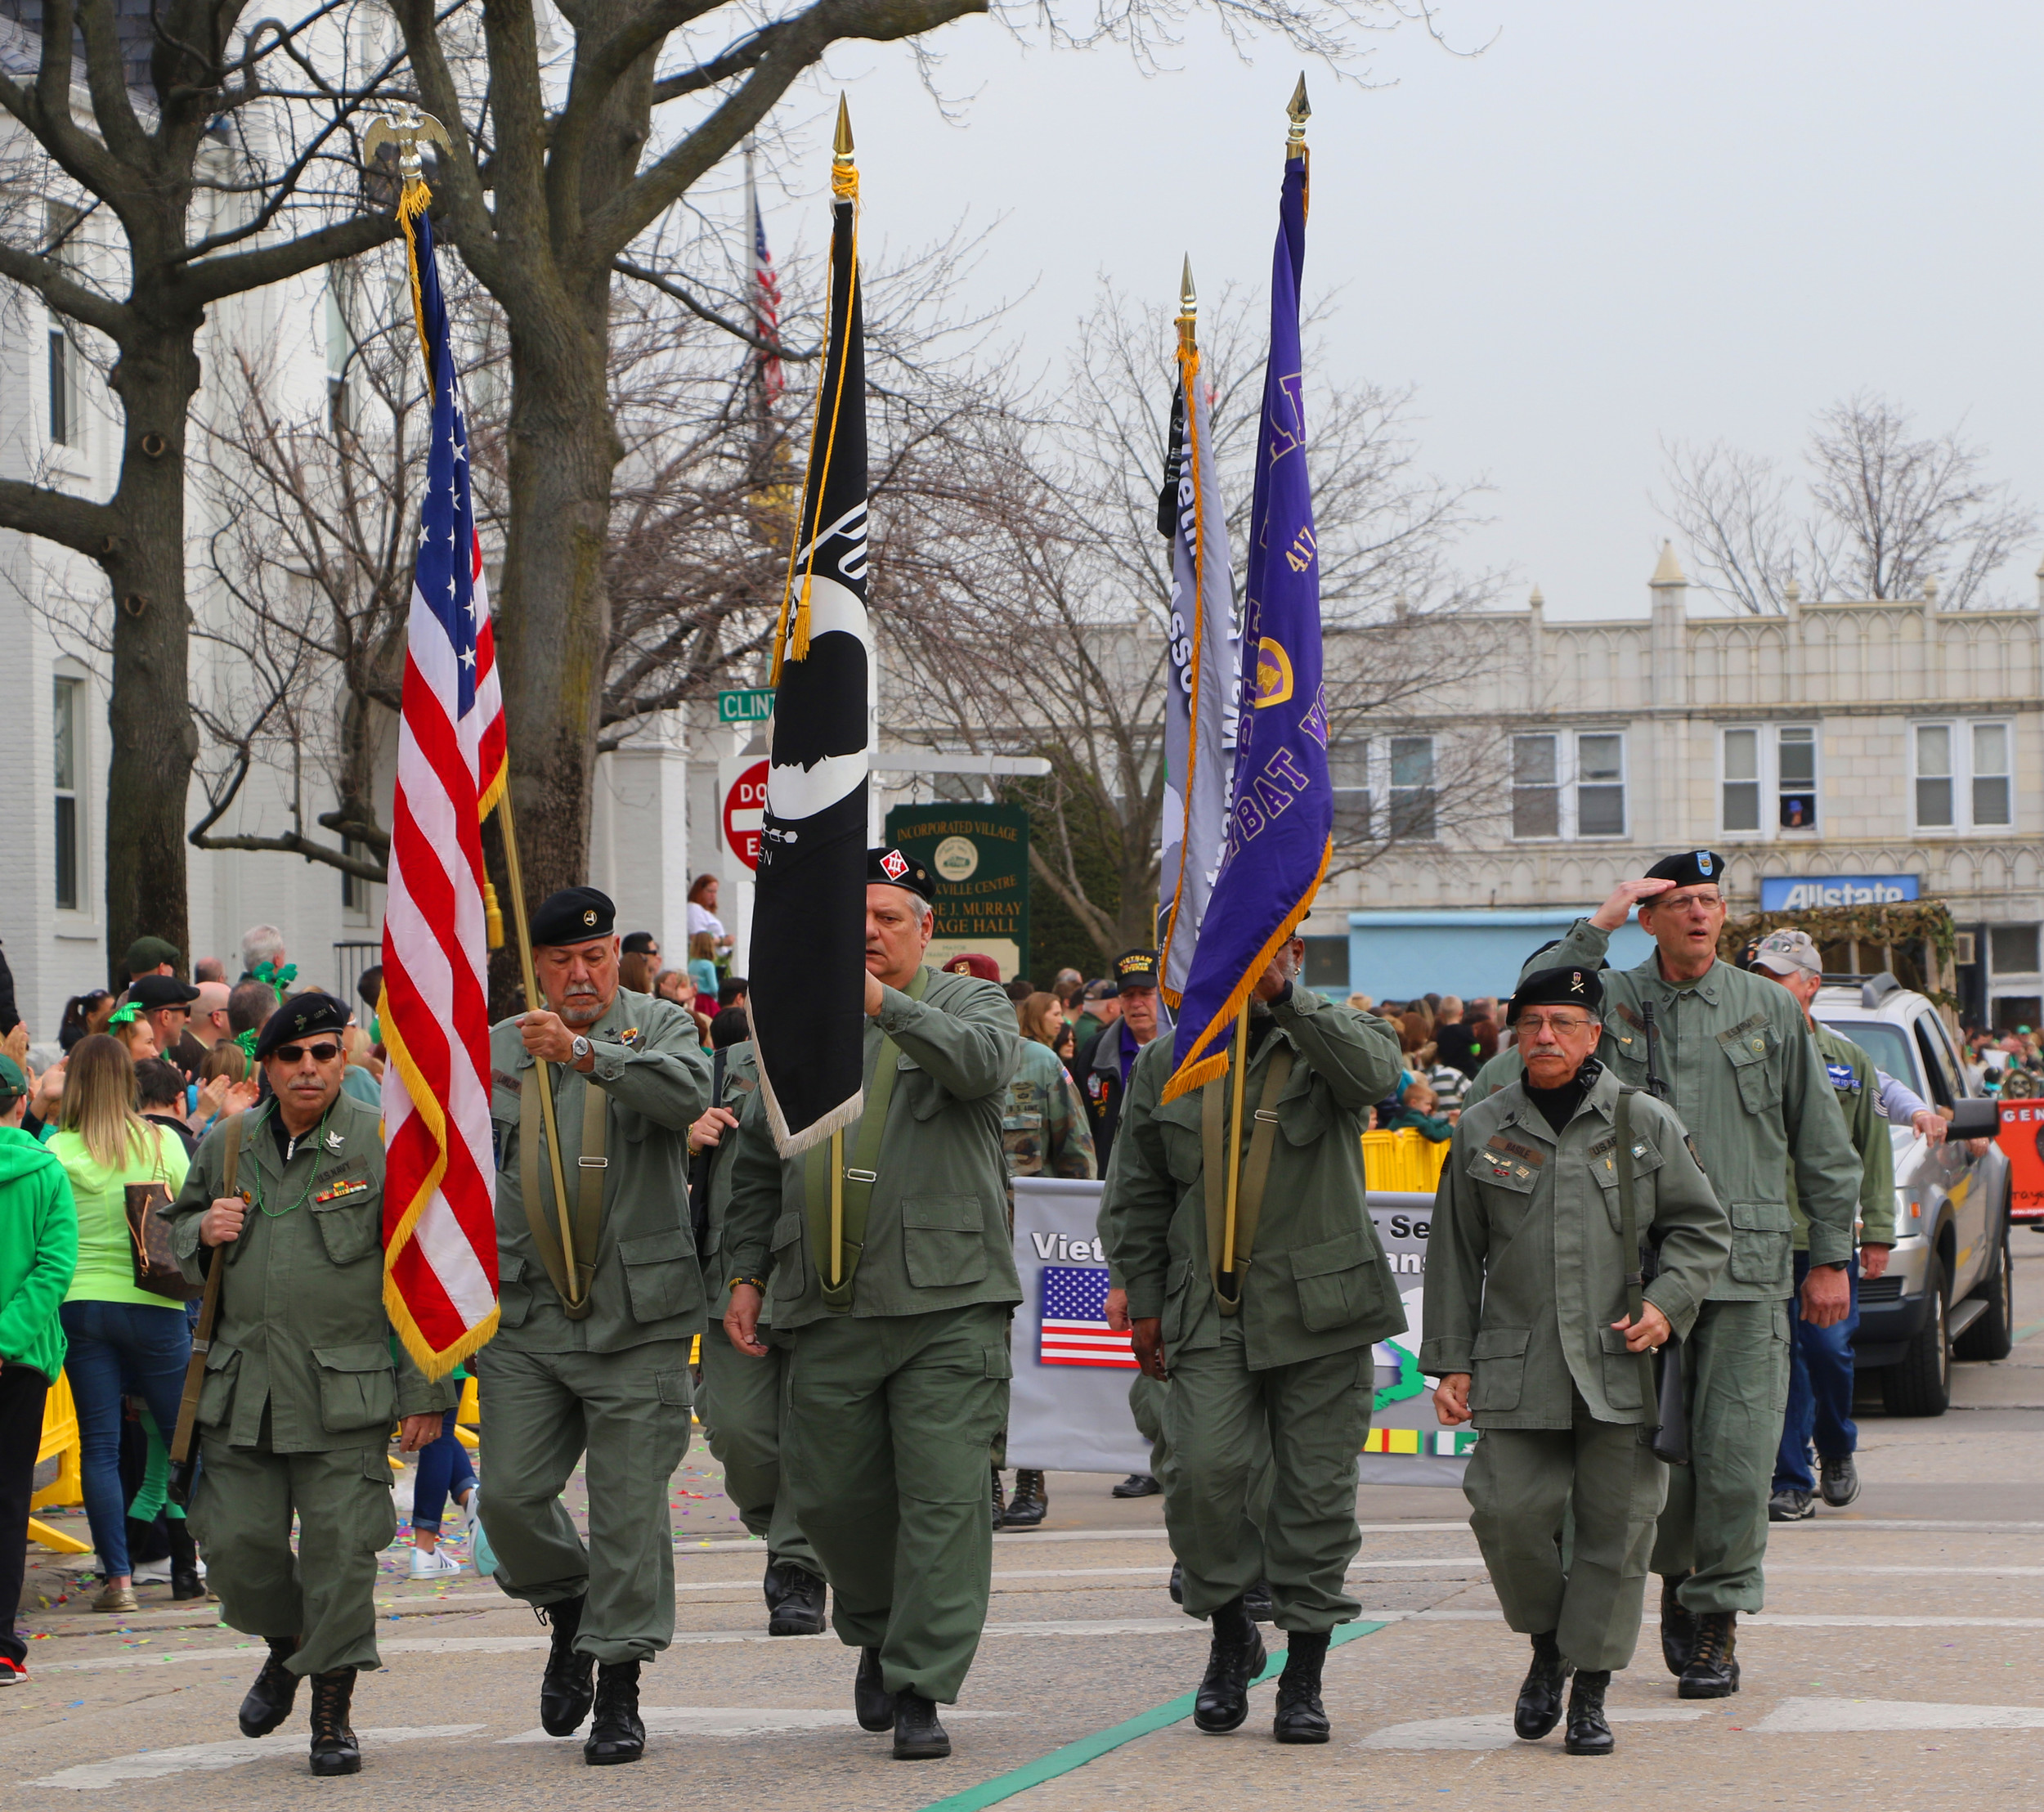 A contingency of Vietnam veterans and prisoners of war came out to participate.